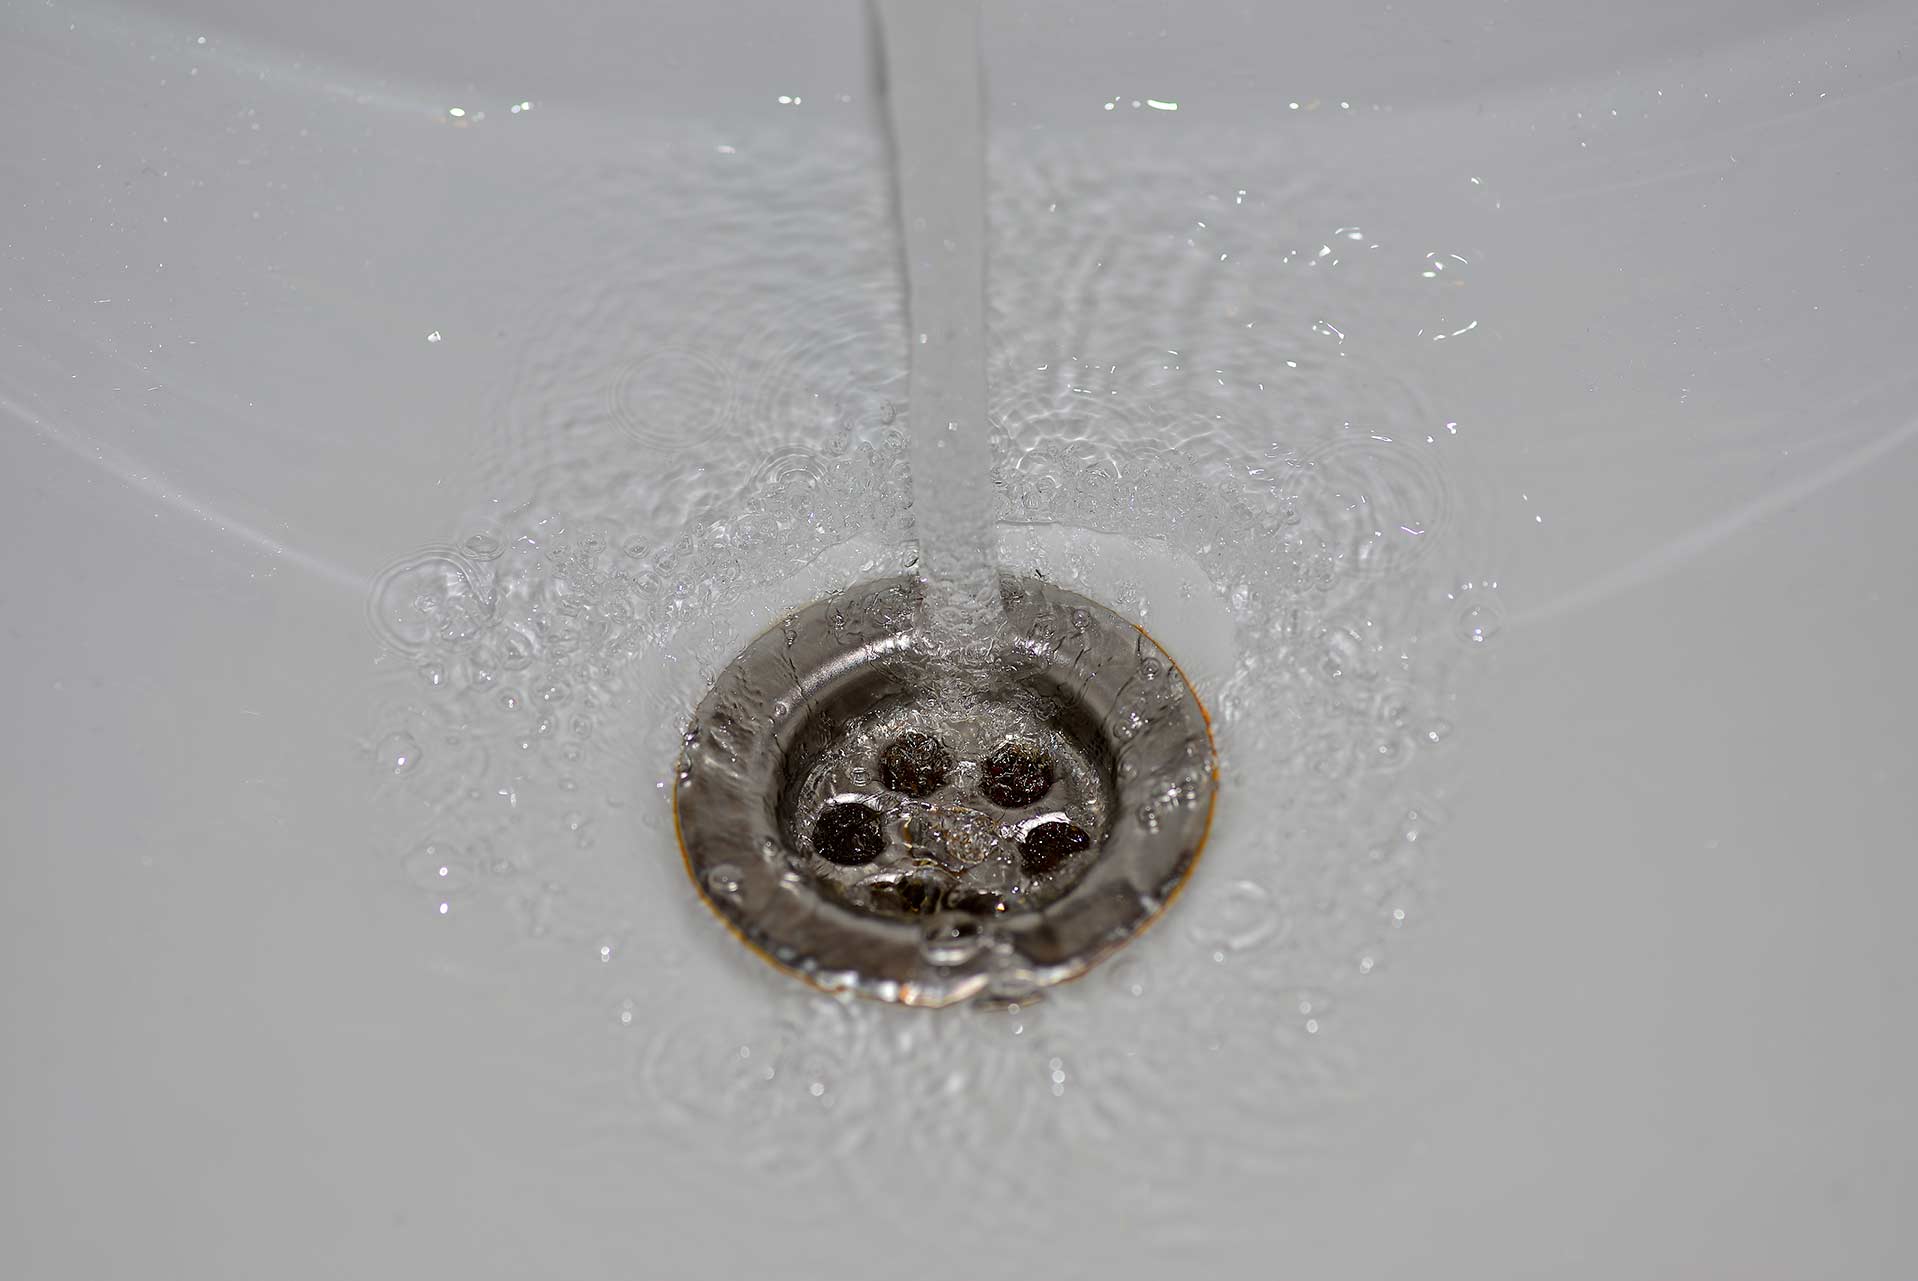 A2B Drains provides services to unblock blocked sinks and drains for properties in Marylebone.